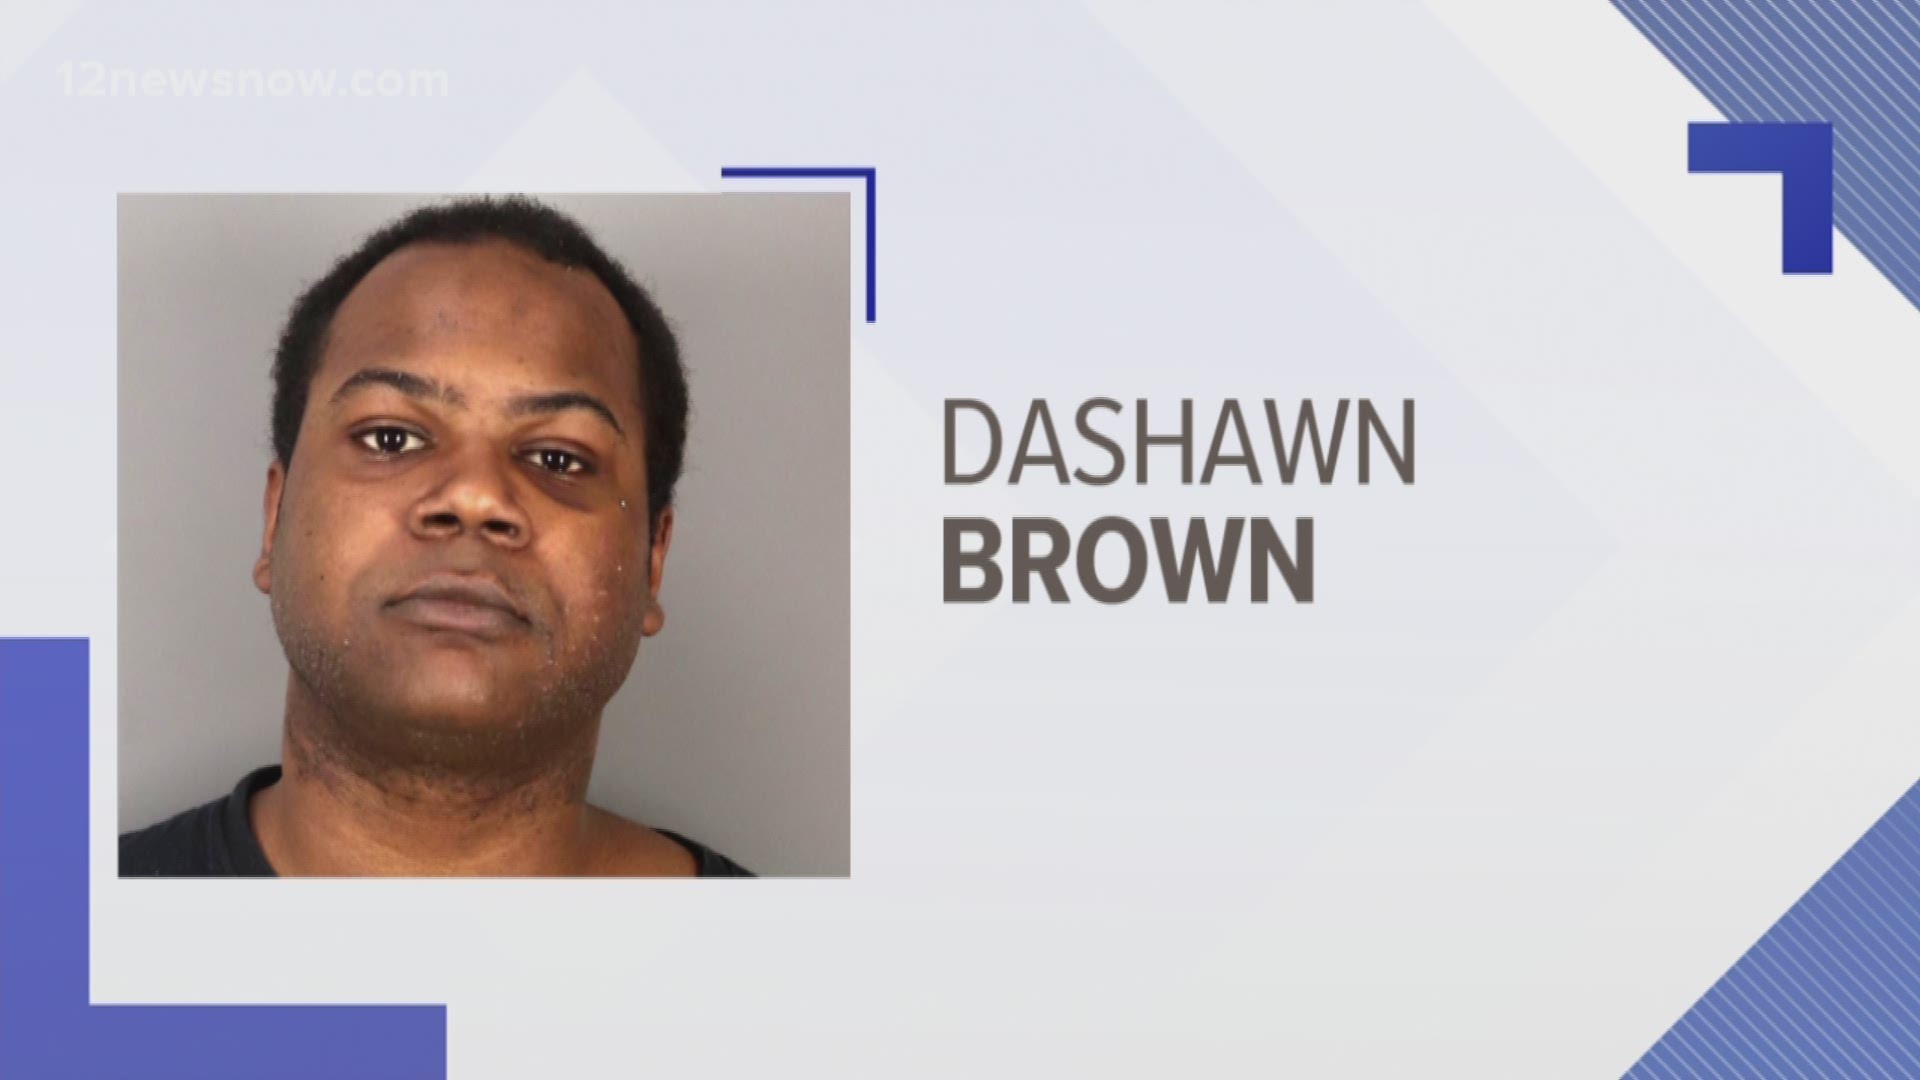 Dashawn Brown was indicted for felony aggravated robbery